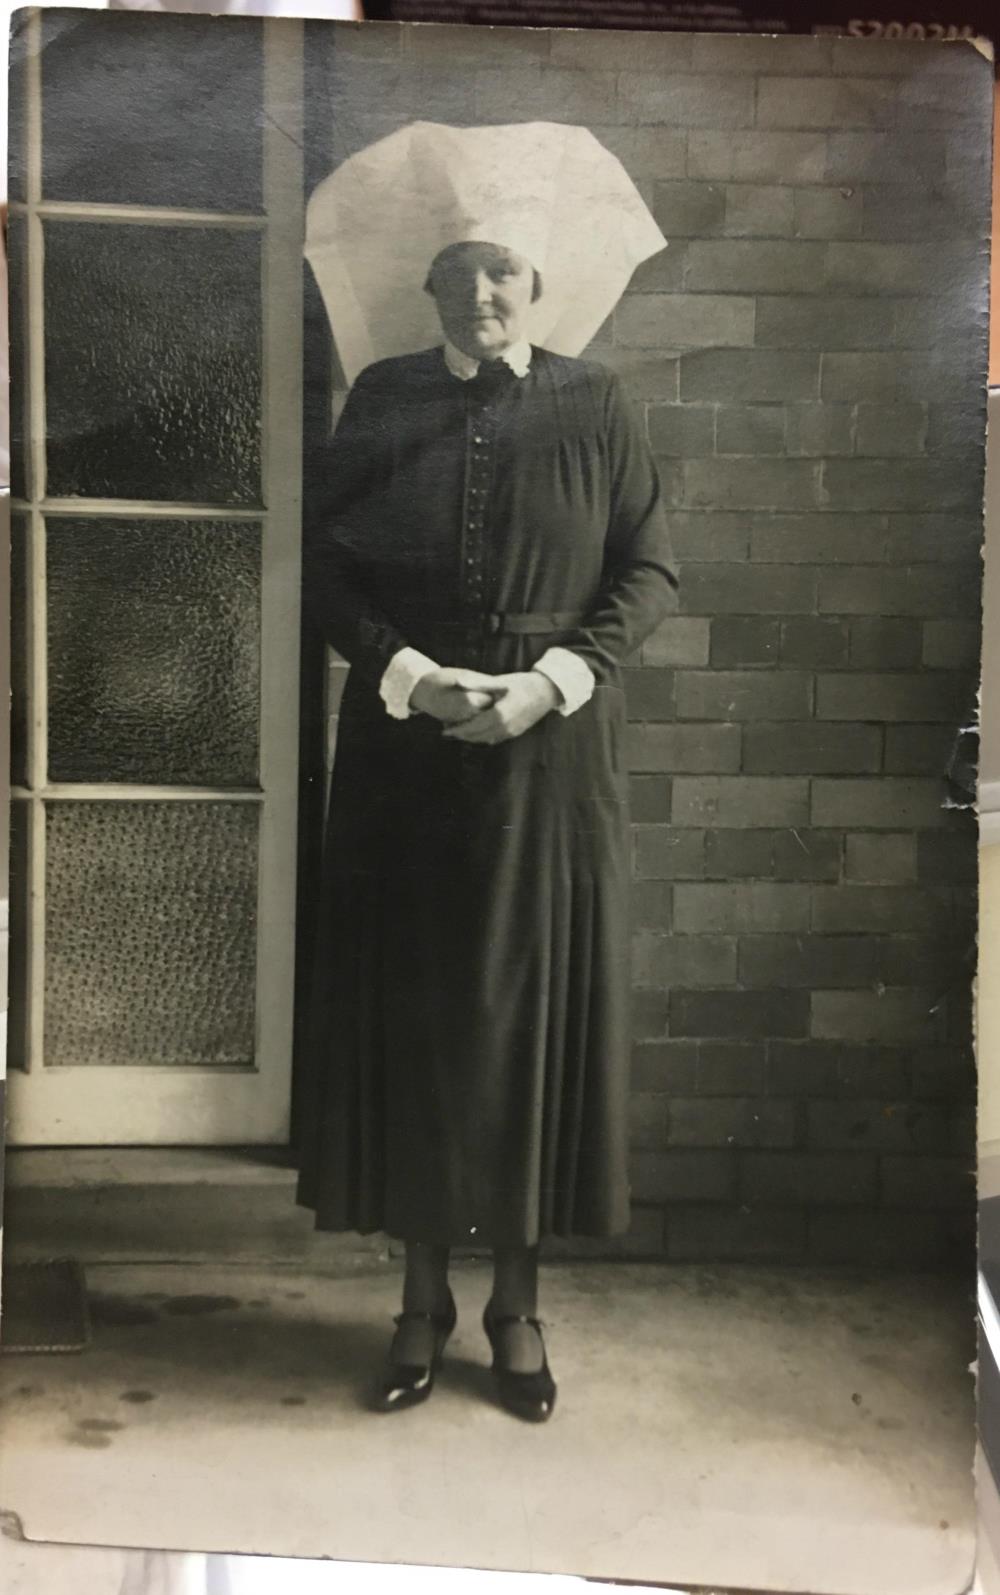 Photograph of an older nurse in dark uniform (possibly a sister) taken outside hospital buildings c1920. Larger hats like this were often worn by matrons as a sign of status.